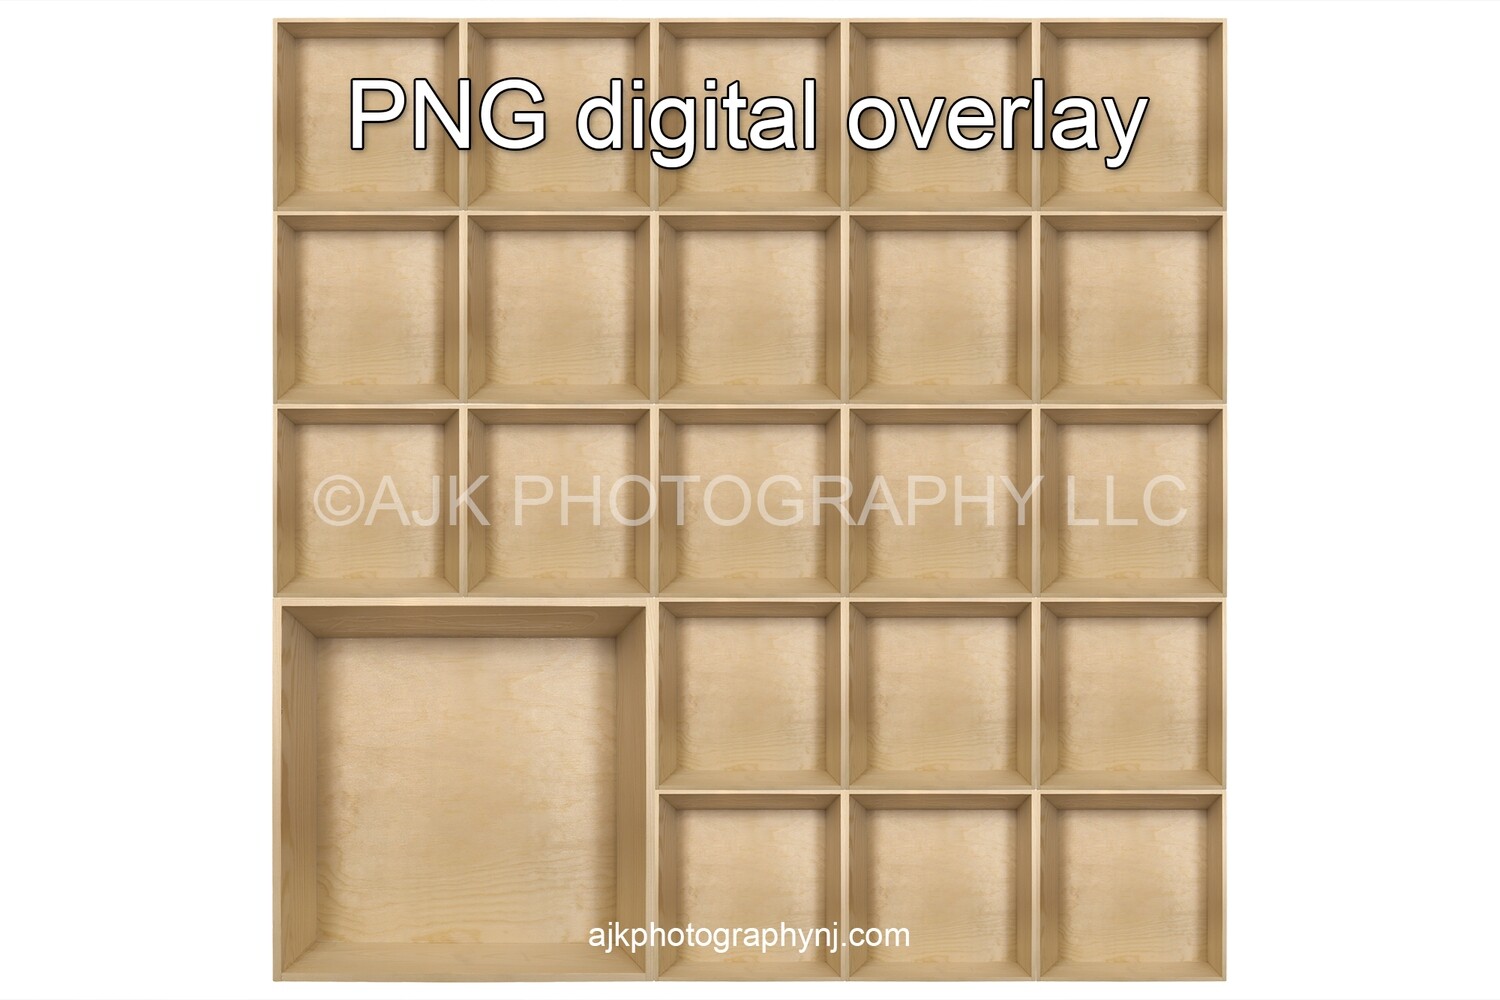 22 empty wood boxes template, class photo template, 1 teacher, 21 students, PNG Digital Overlay